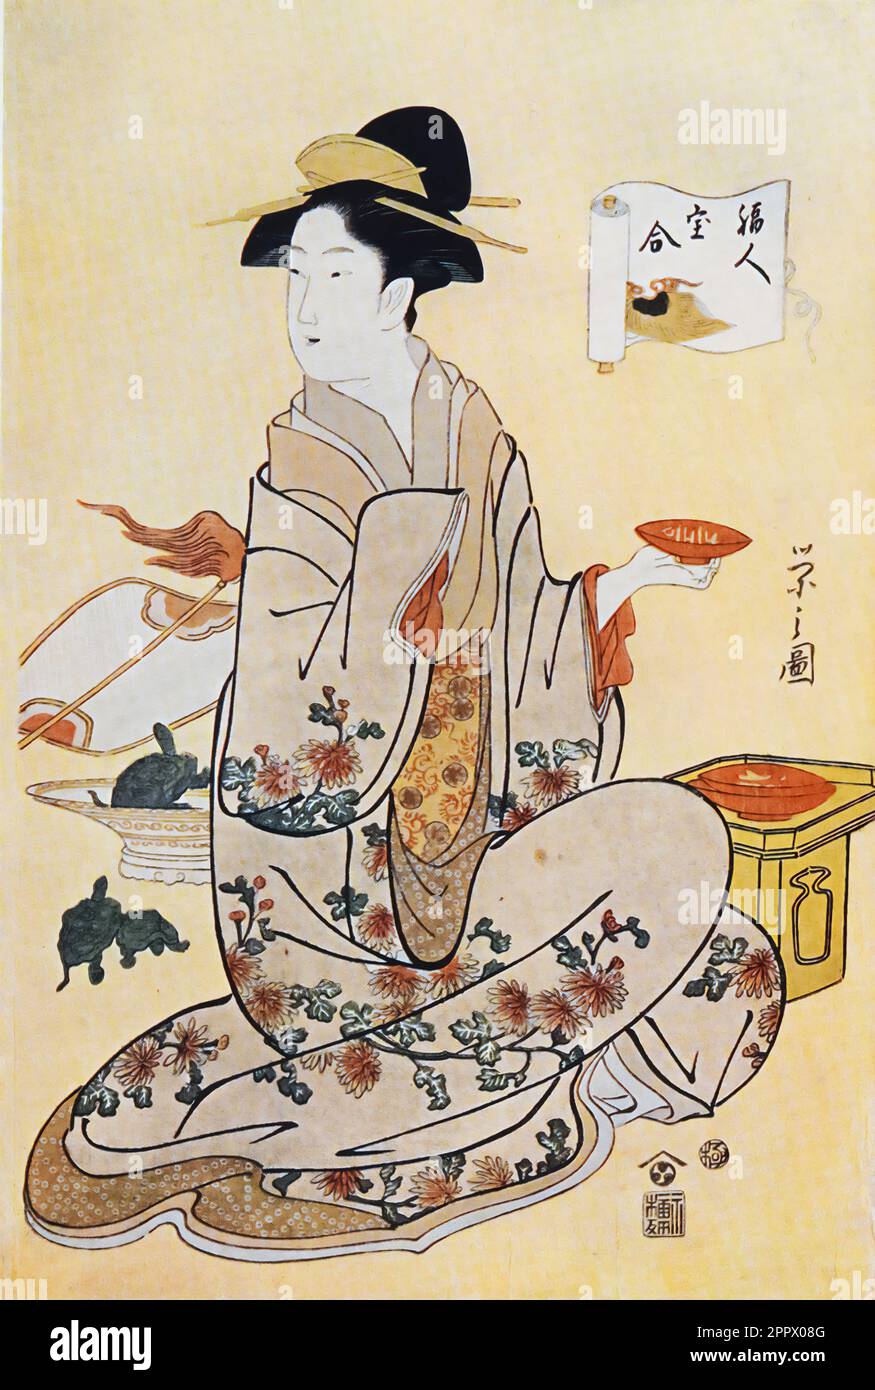 YEISHI aka Eishi : Lady holding Sake Cup and with Attributes of Good Luck Ancient Japanese colour print from the book ' A history of Japanese colour-prints ' by Woldemar von Seidlitz, 1850-1922 Publisher London : Heinemann 1910 Stock Photo